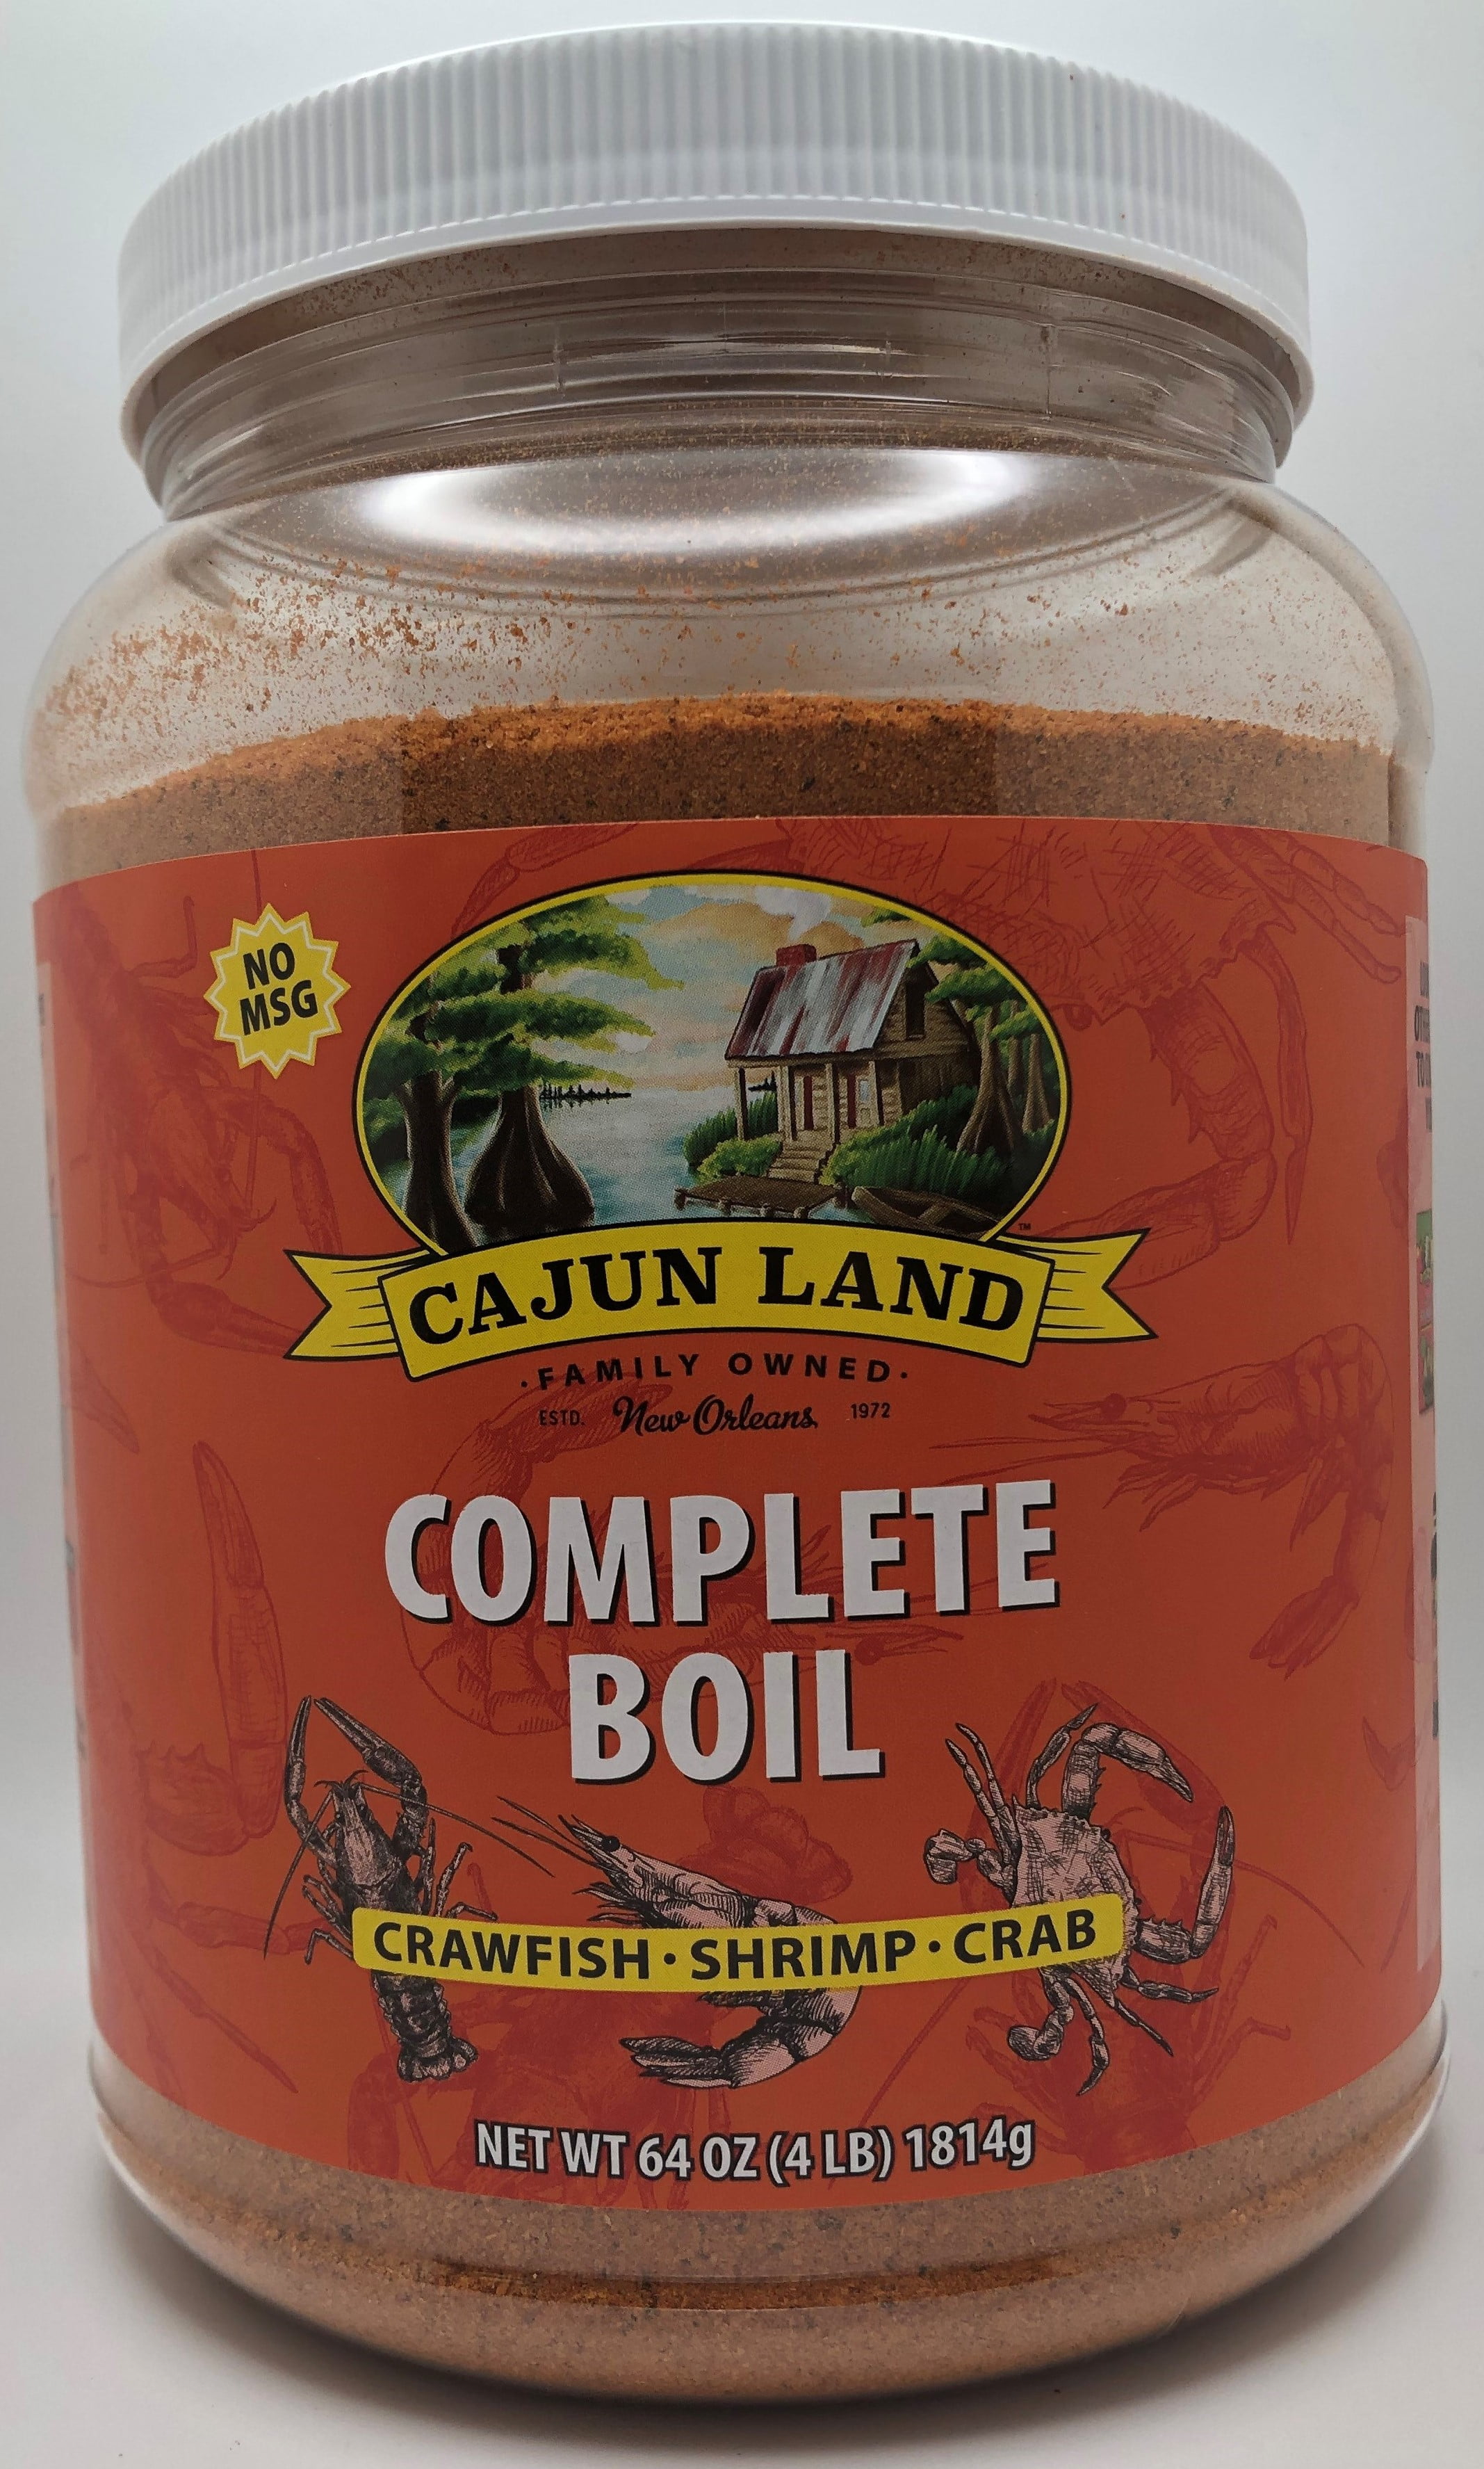 Now Available Our Southern Boyz Boil Seasoning.. #crawfish #boilingcra